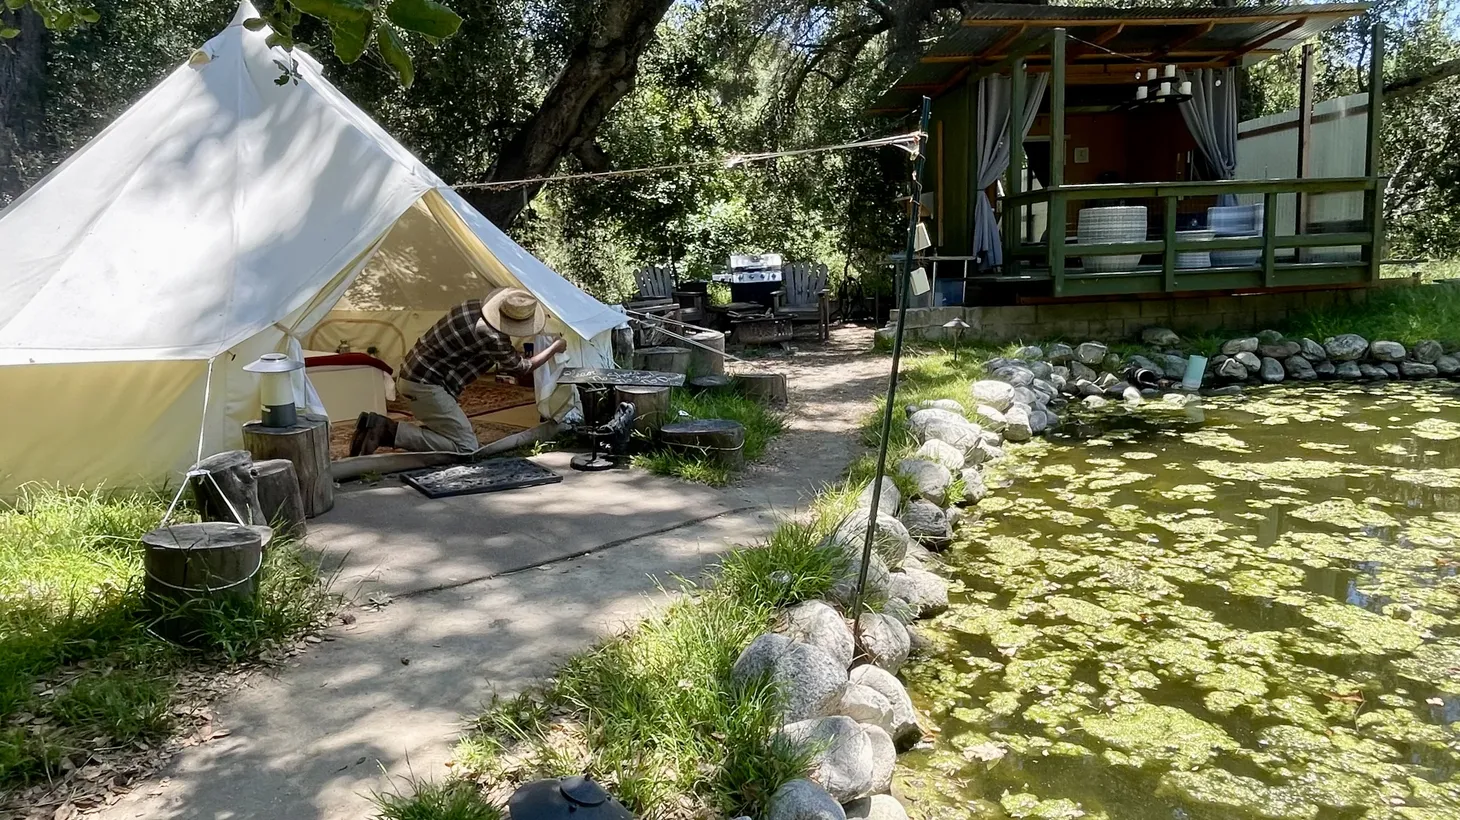 JB Wagoner prepares the glamping site called Temecula Bullfrog Pond, which he rents to travelers on his 20-acre ranch outside of Temecula. Private property owners like him are tapping into the growing upscale camping market.